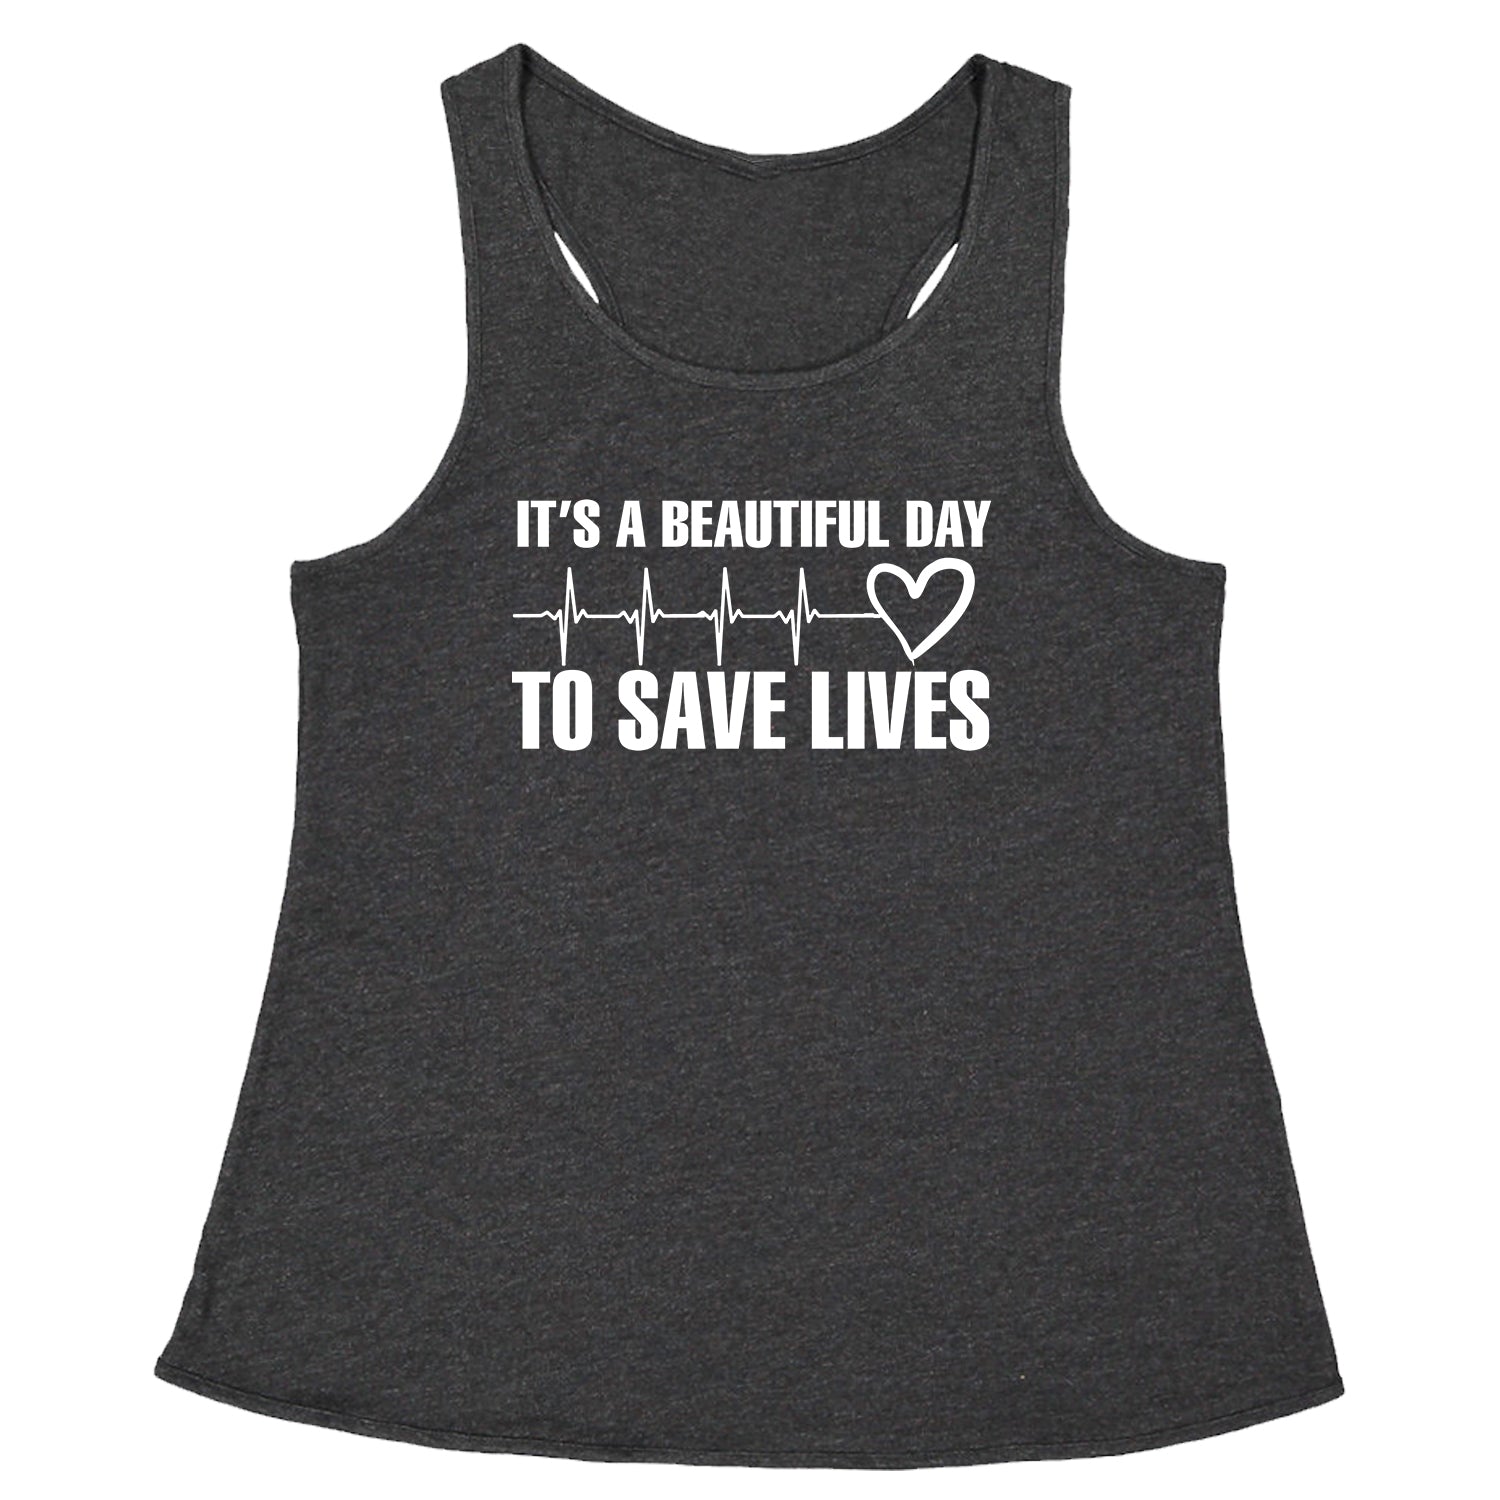 It's A Beautiful Day To Save Lives (White Print) Racerback Tank Top for Women #expressiontees by Expression Tees